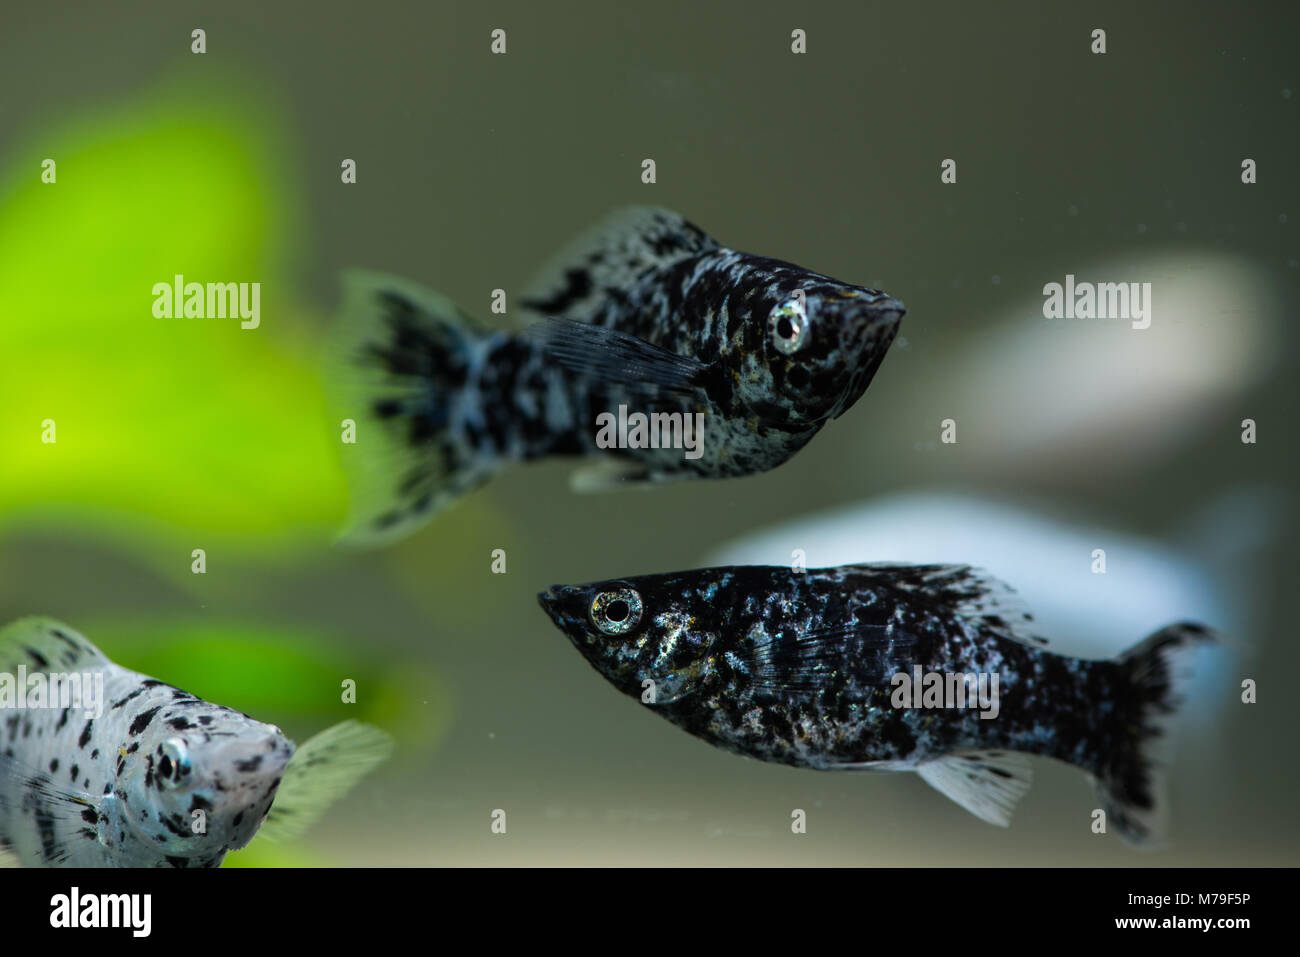 Some fish in a freshwater aquarium. Stock Photo